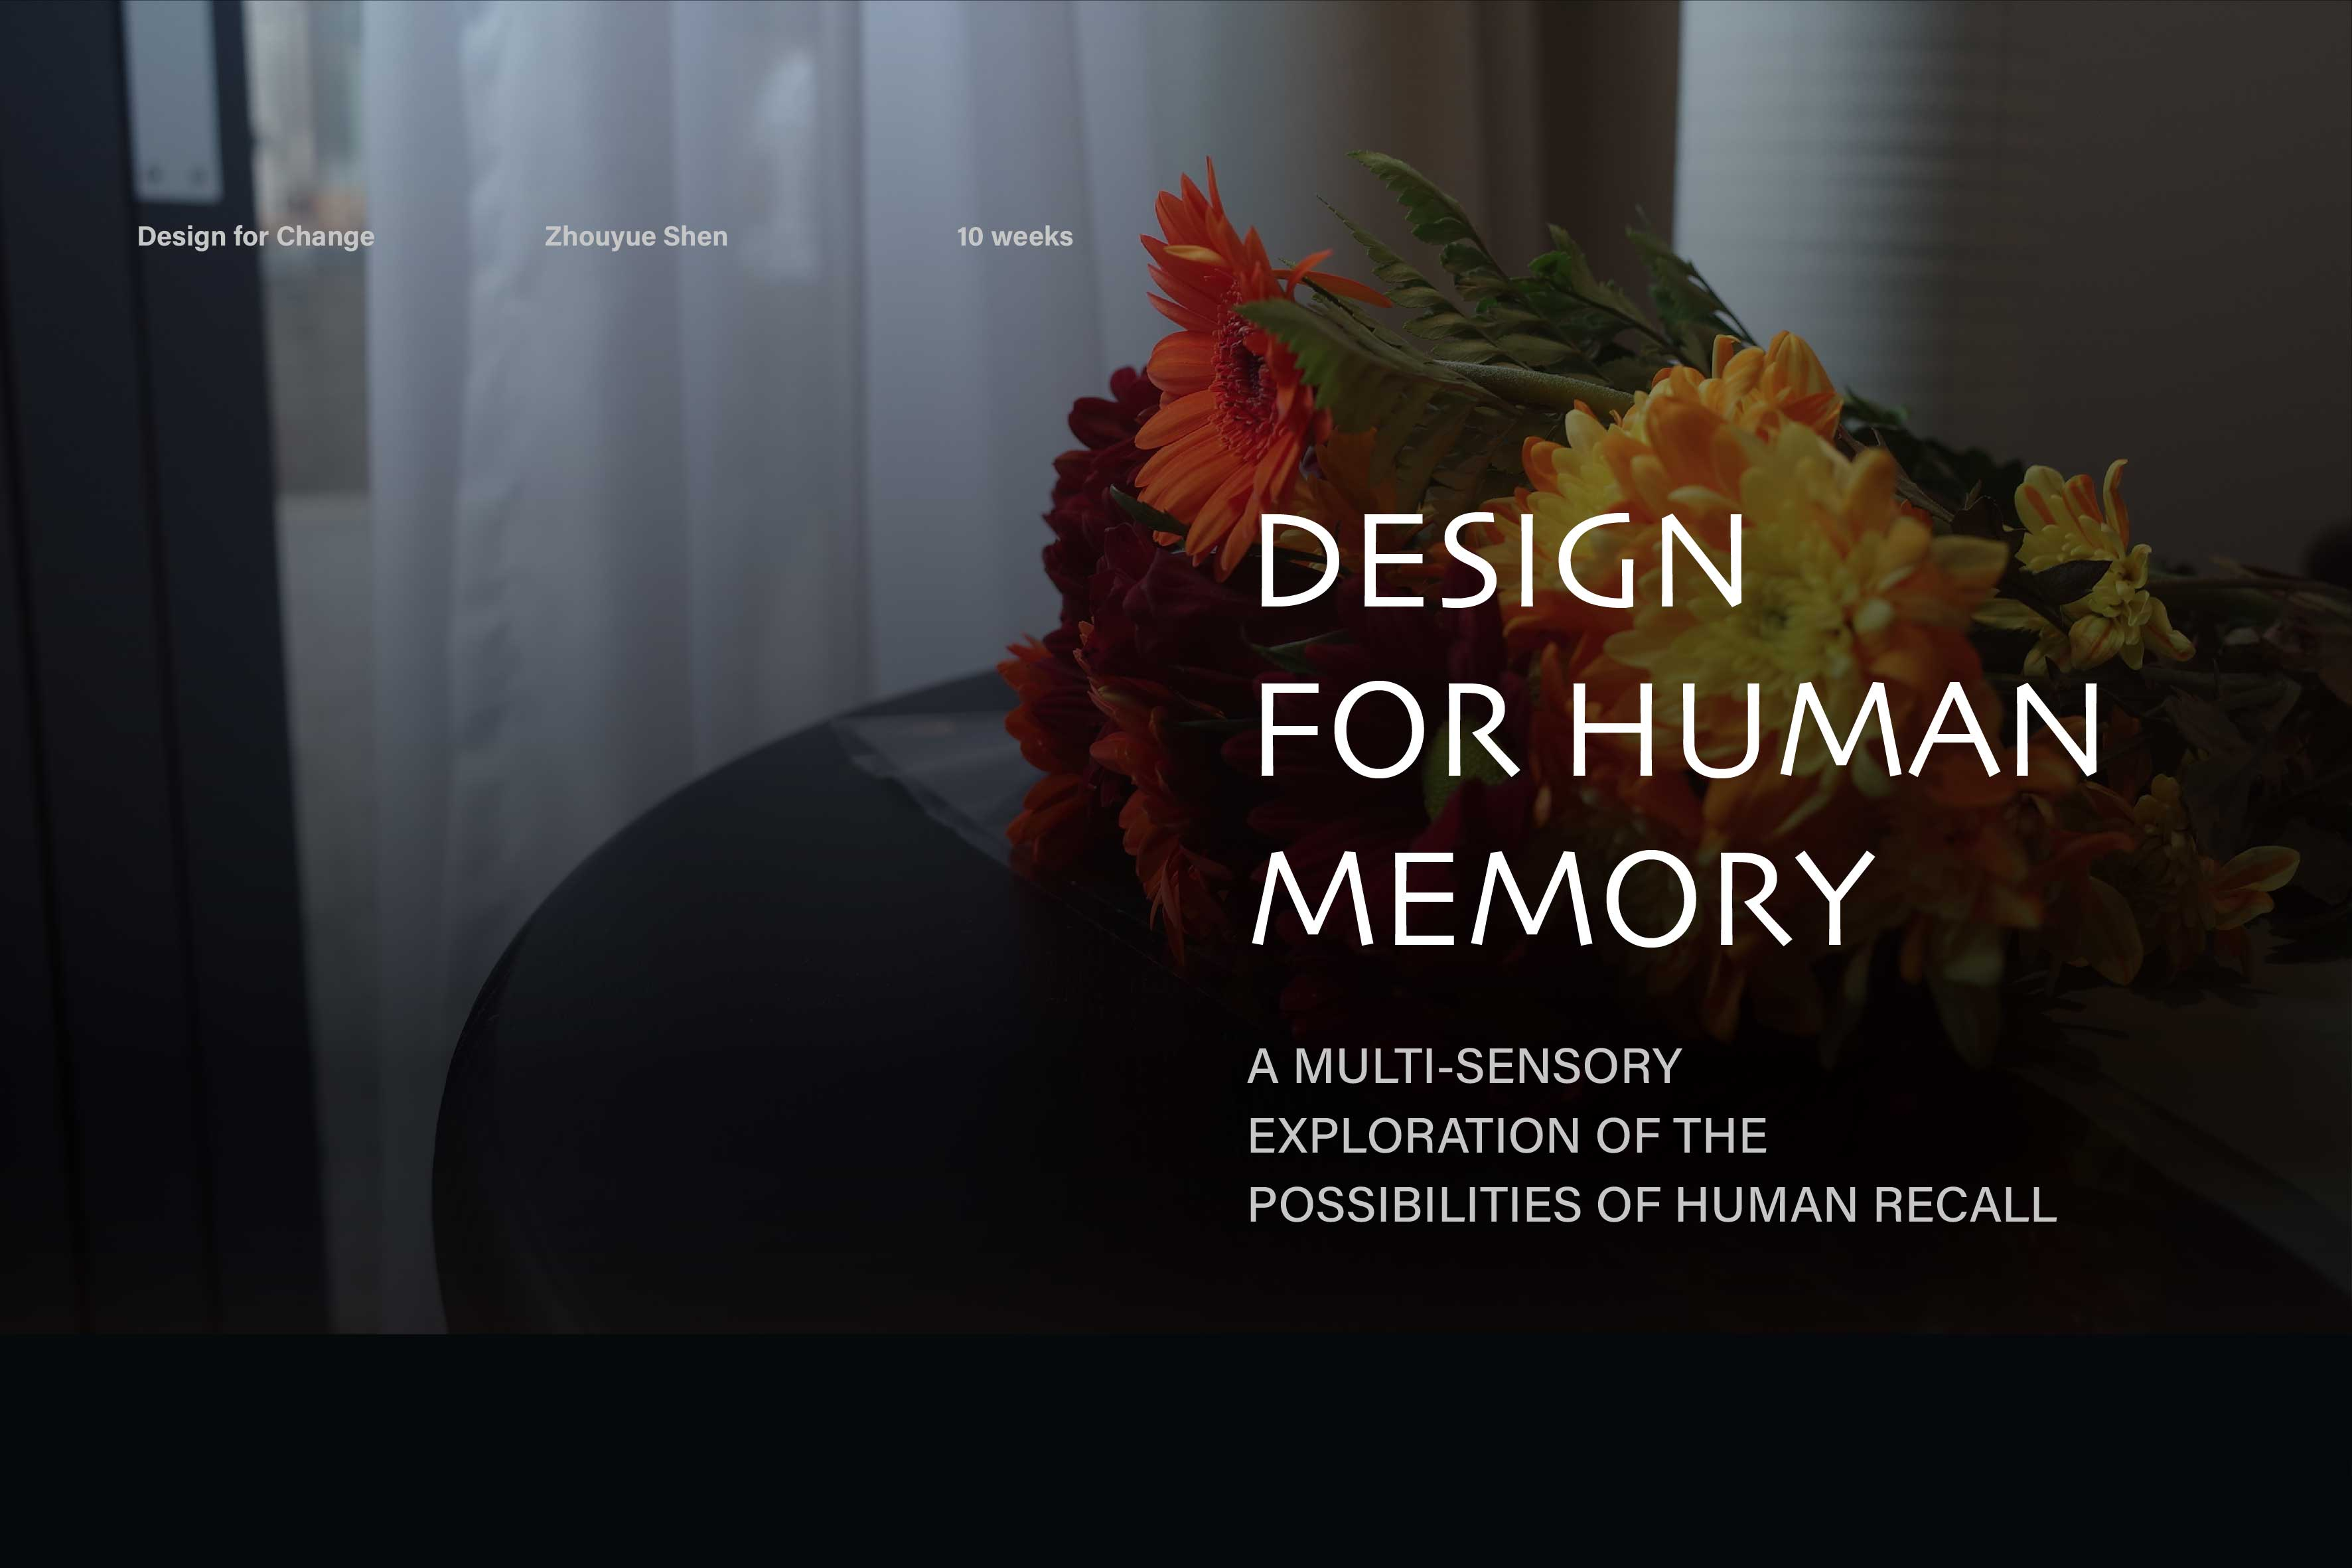 Design for human memory - A multi-sensory exploration of the possibilities of human recall